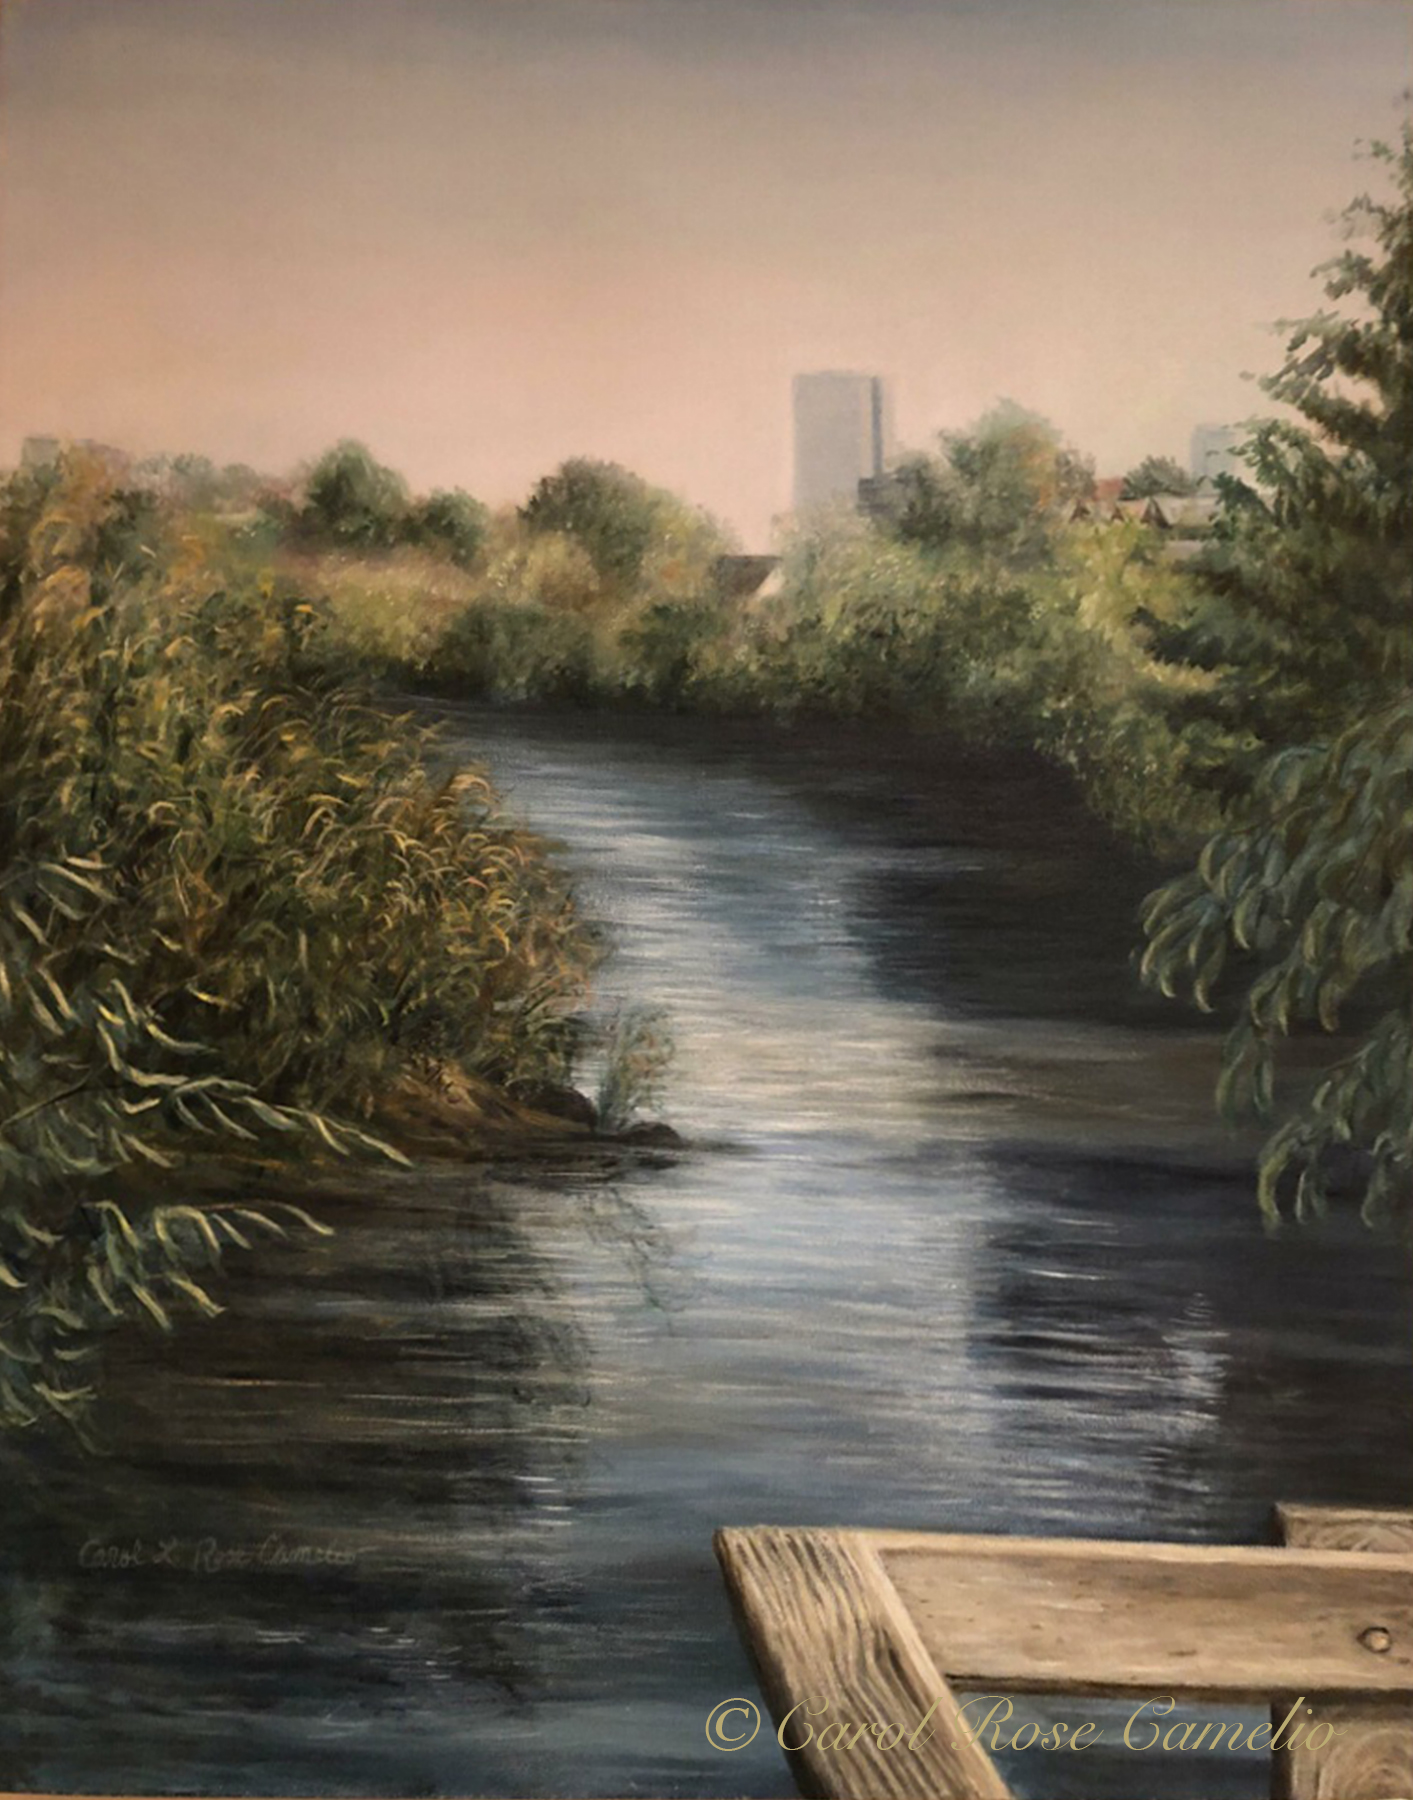 Wellington: A wooded river scene with Boston's Hancock Tower in the distance.